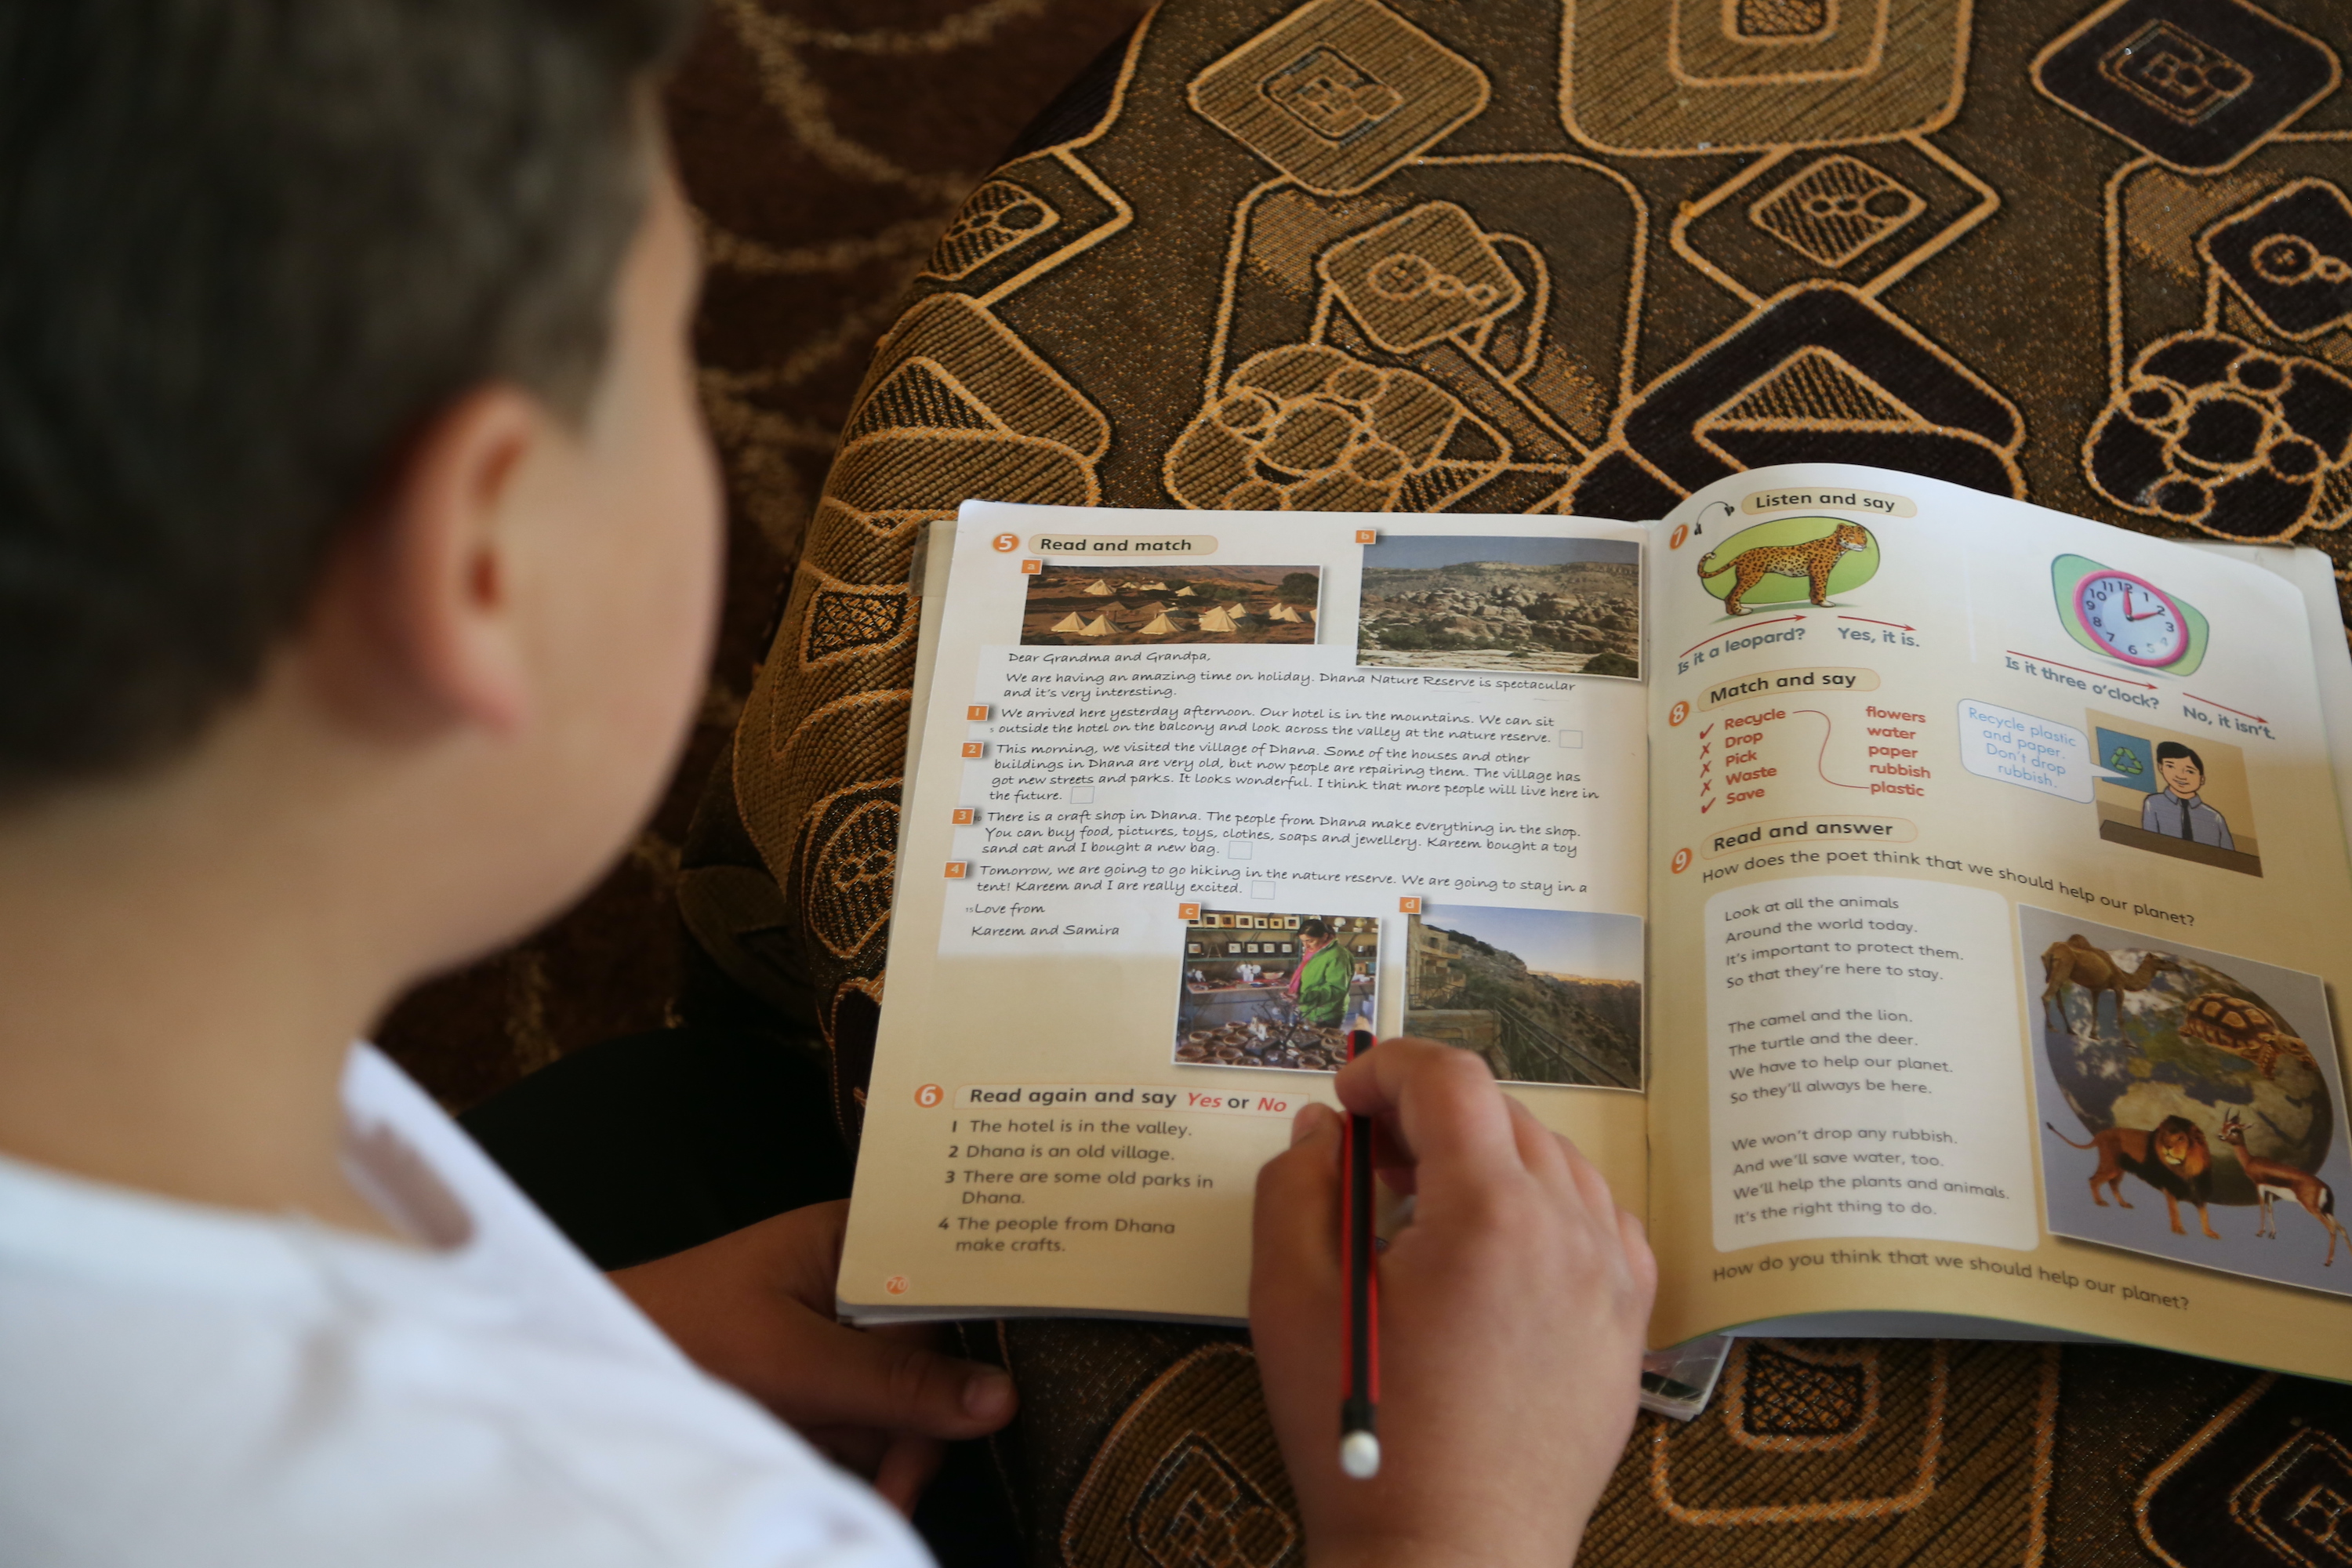 Mohammed, 12, takes English lessons as part of World Vision's remedial education project in northern Jordan